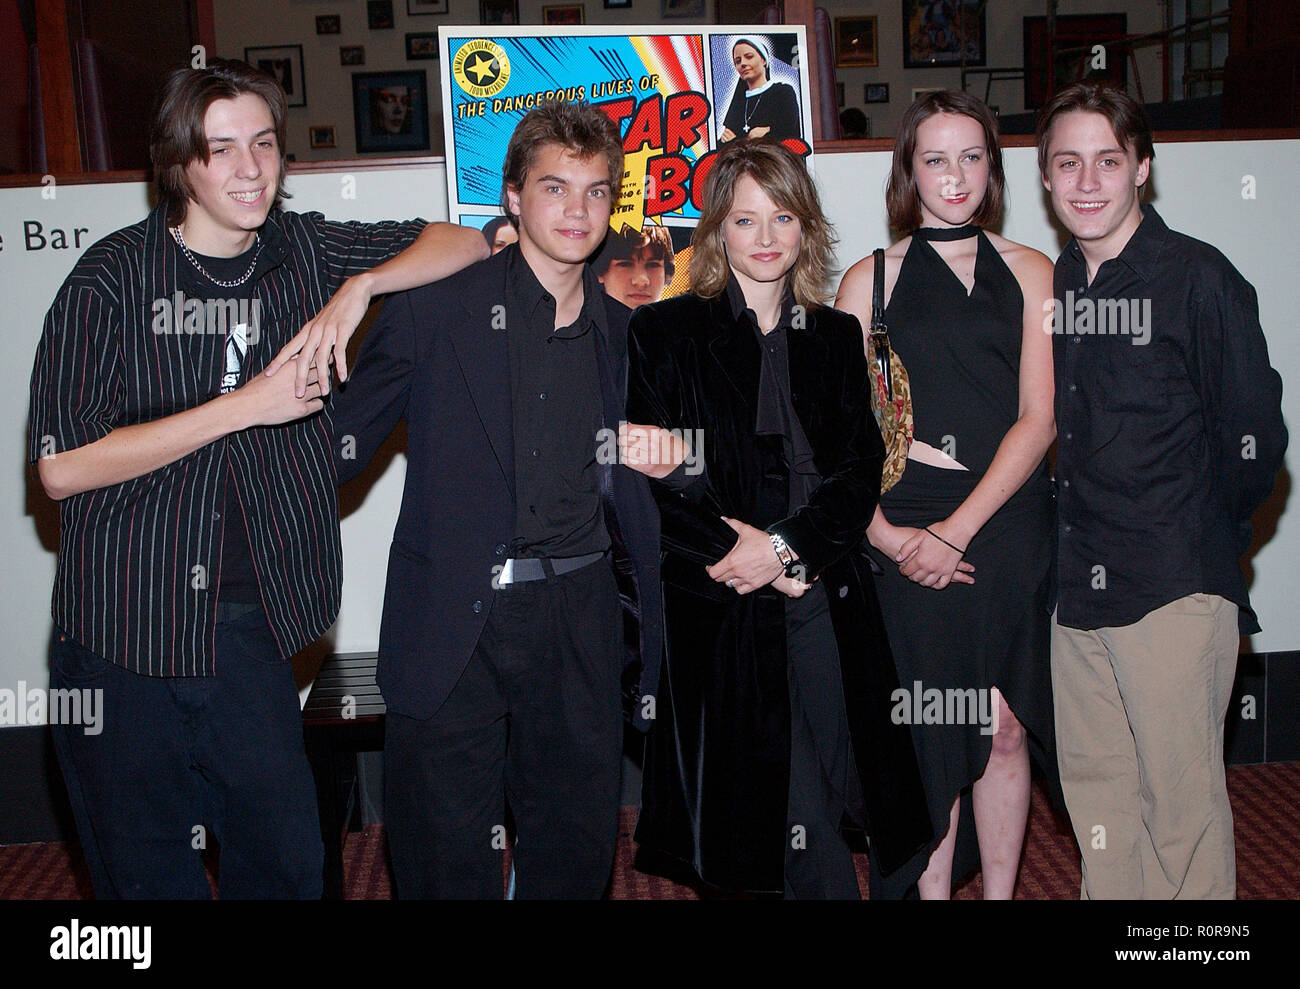 The cast, Jake Richardson, Emile Hirsh, Jodie Foster, Jena Malone and Kieran Culkin posing at the premiere of the ' Dangerous Lives of Altar Boys ' as Stock Photo